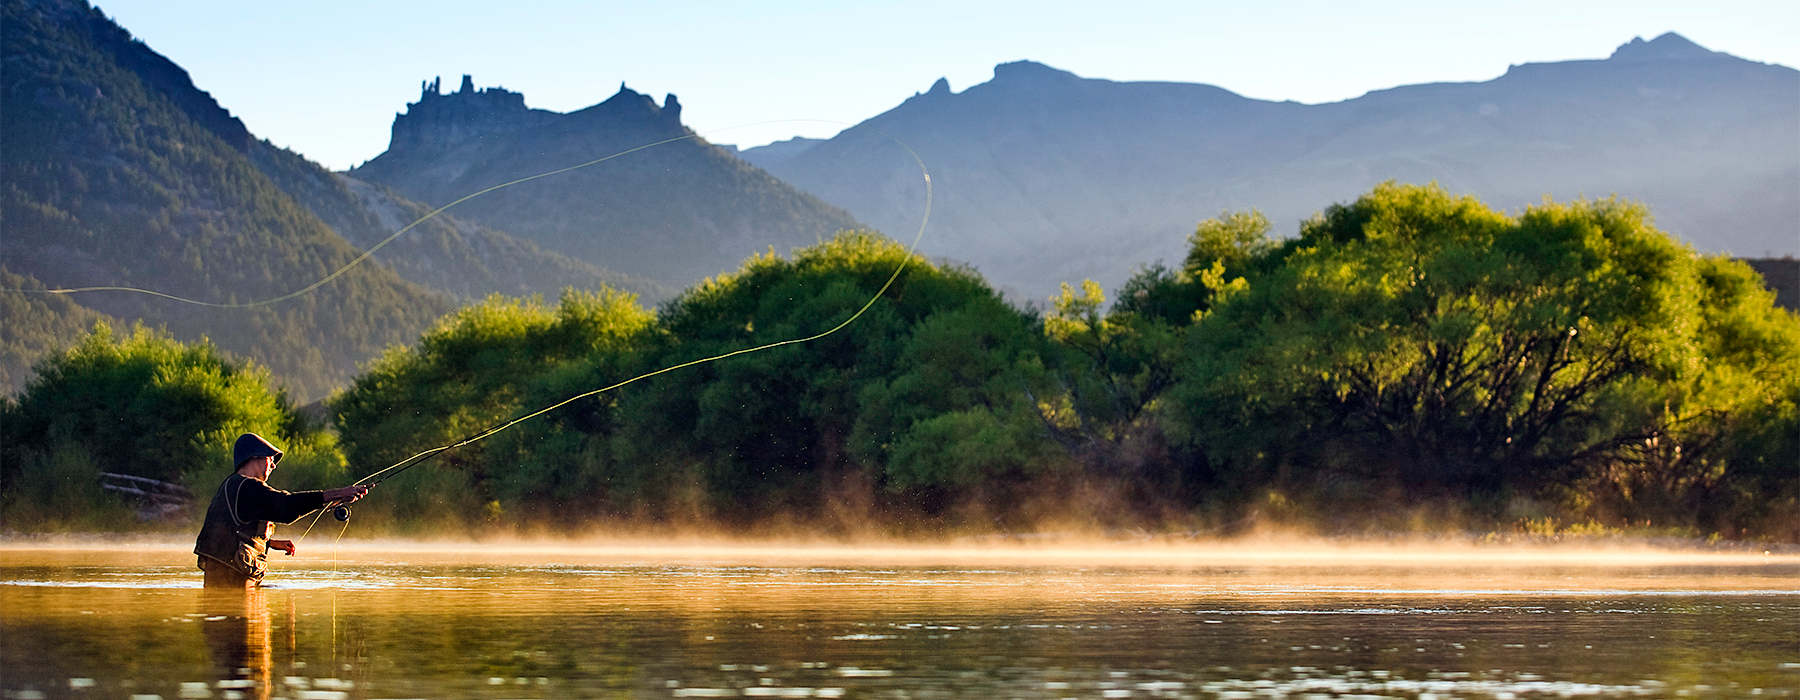 Patagonia Outfitters - Argentina Fly Fishing - Fly Shop